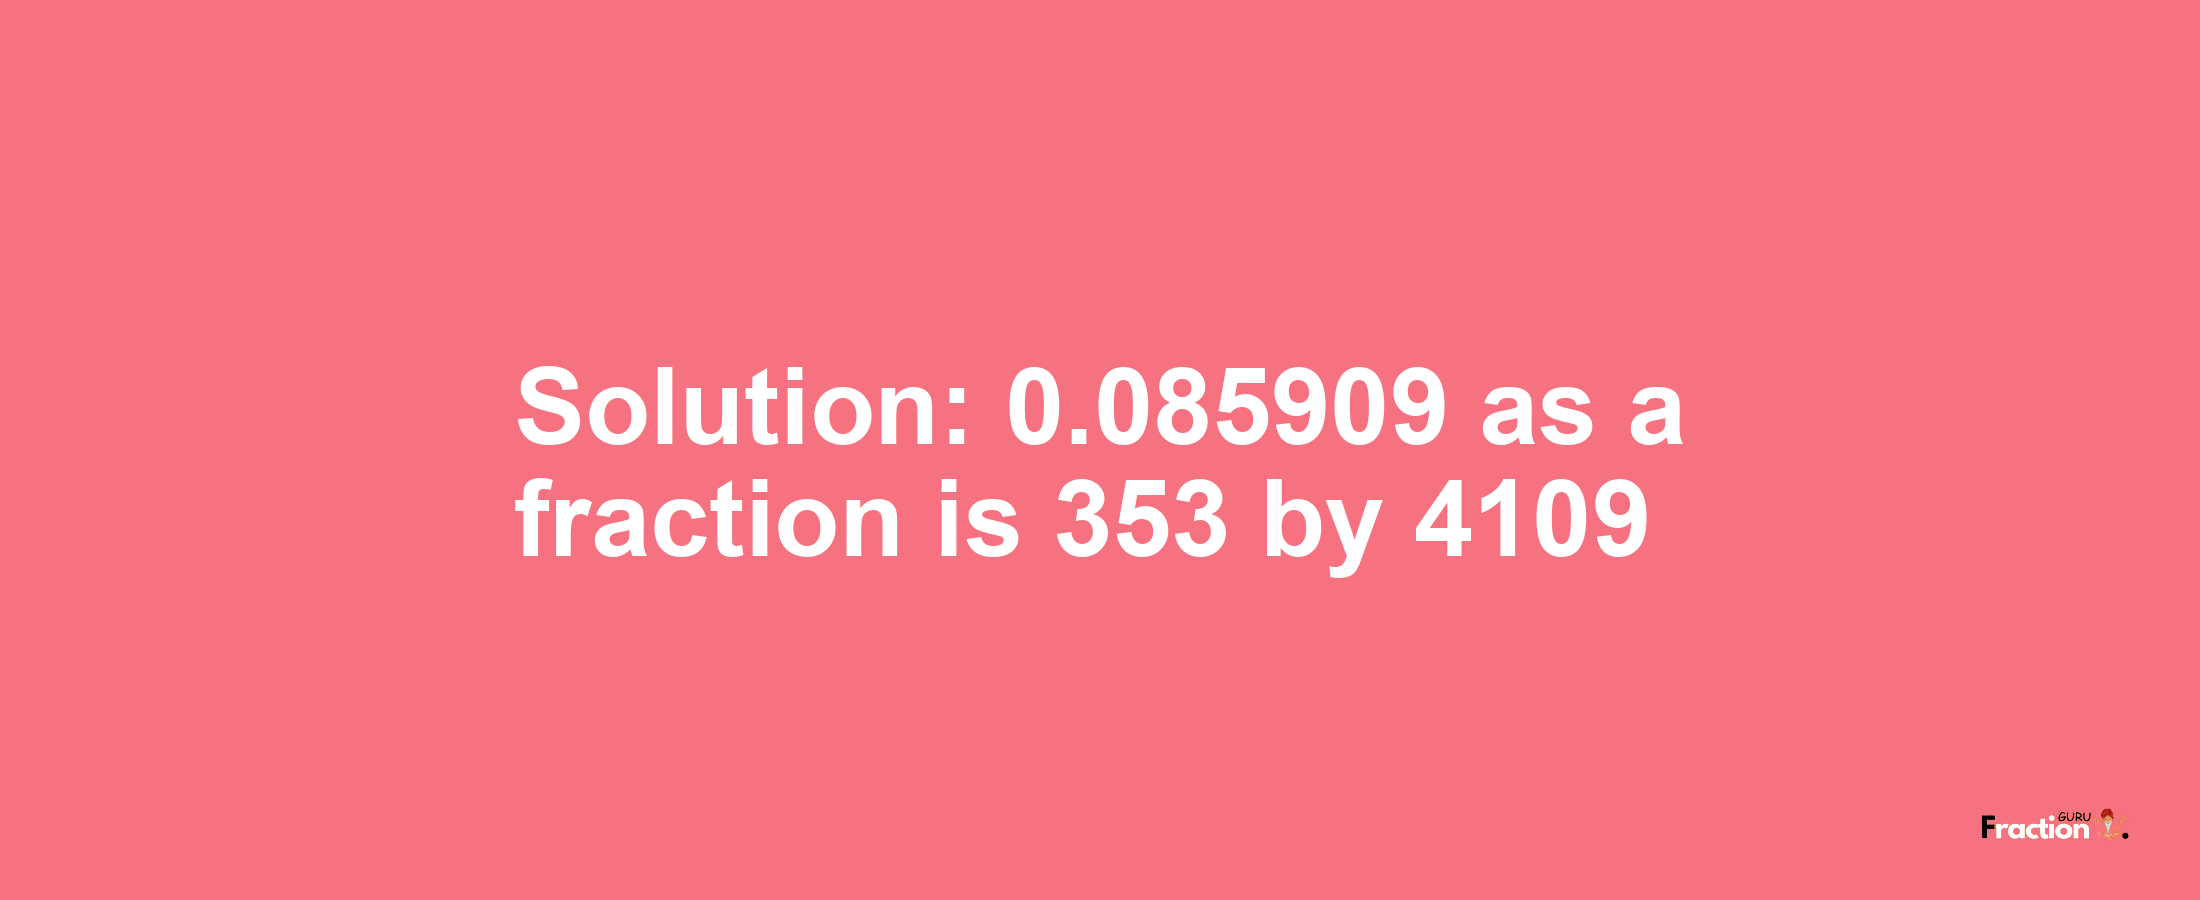 Solution:0.085909 as a fraction is 353/4109